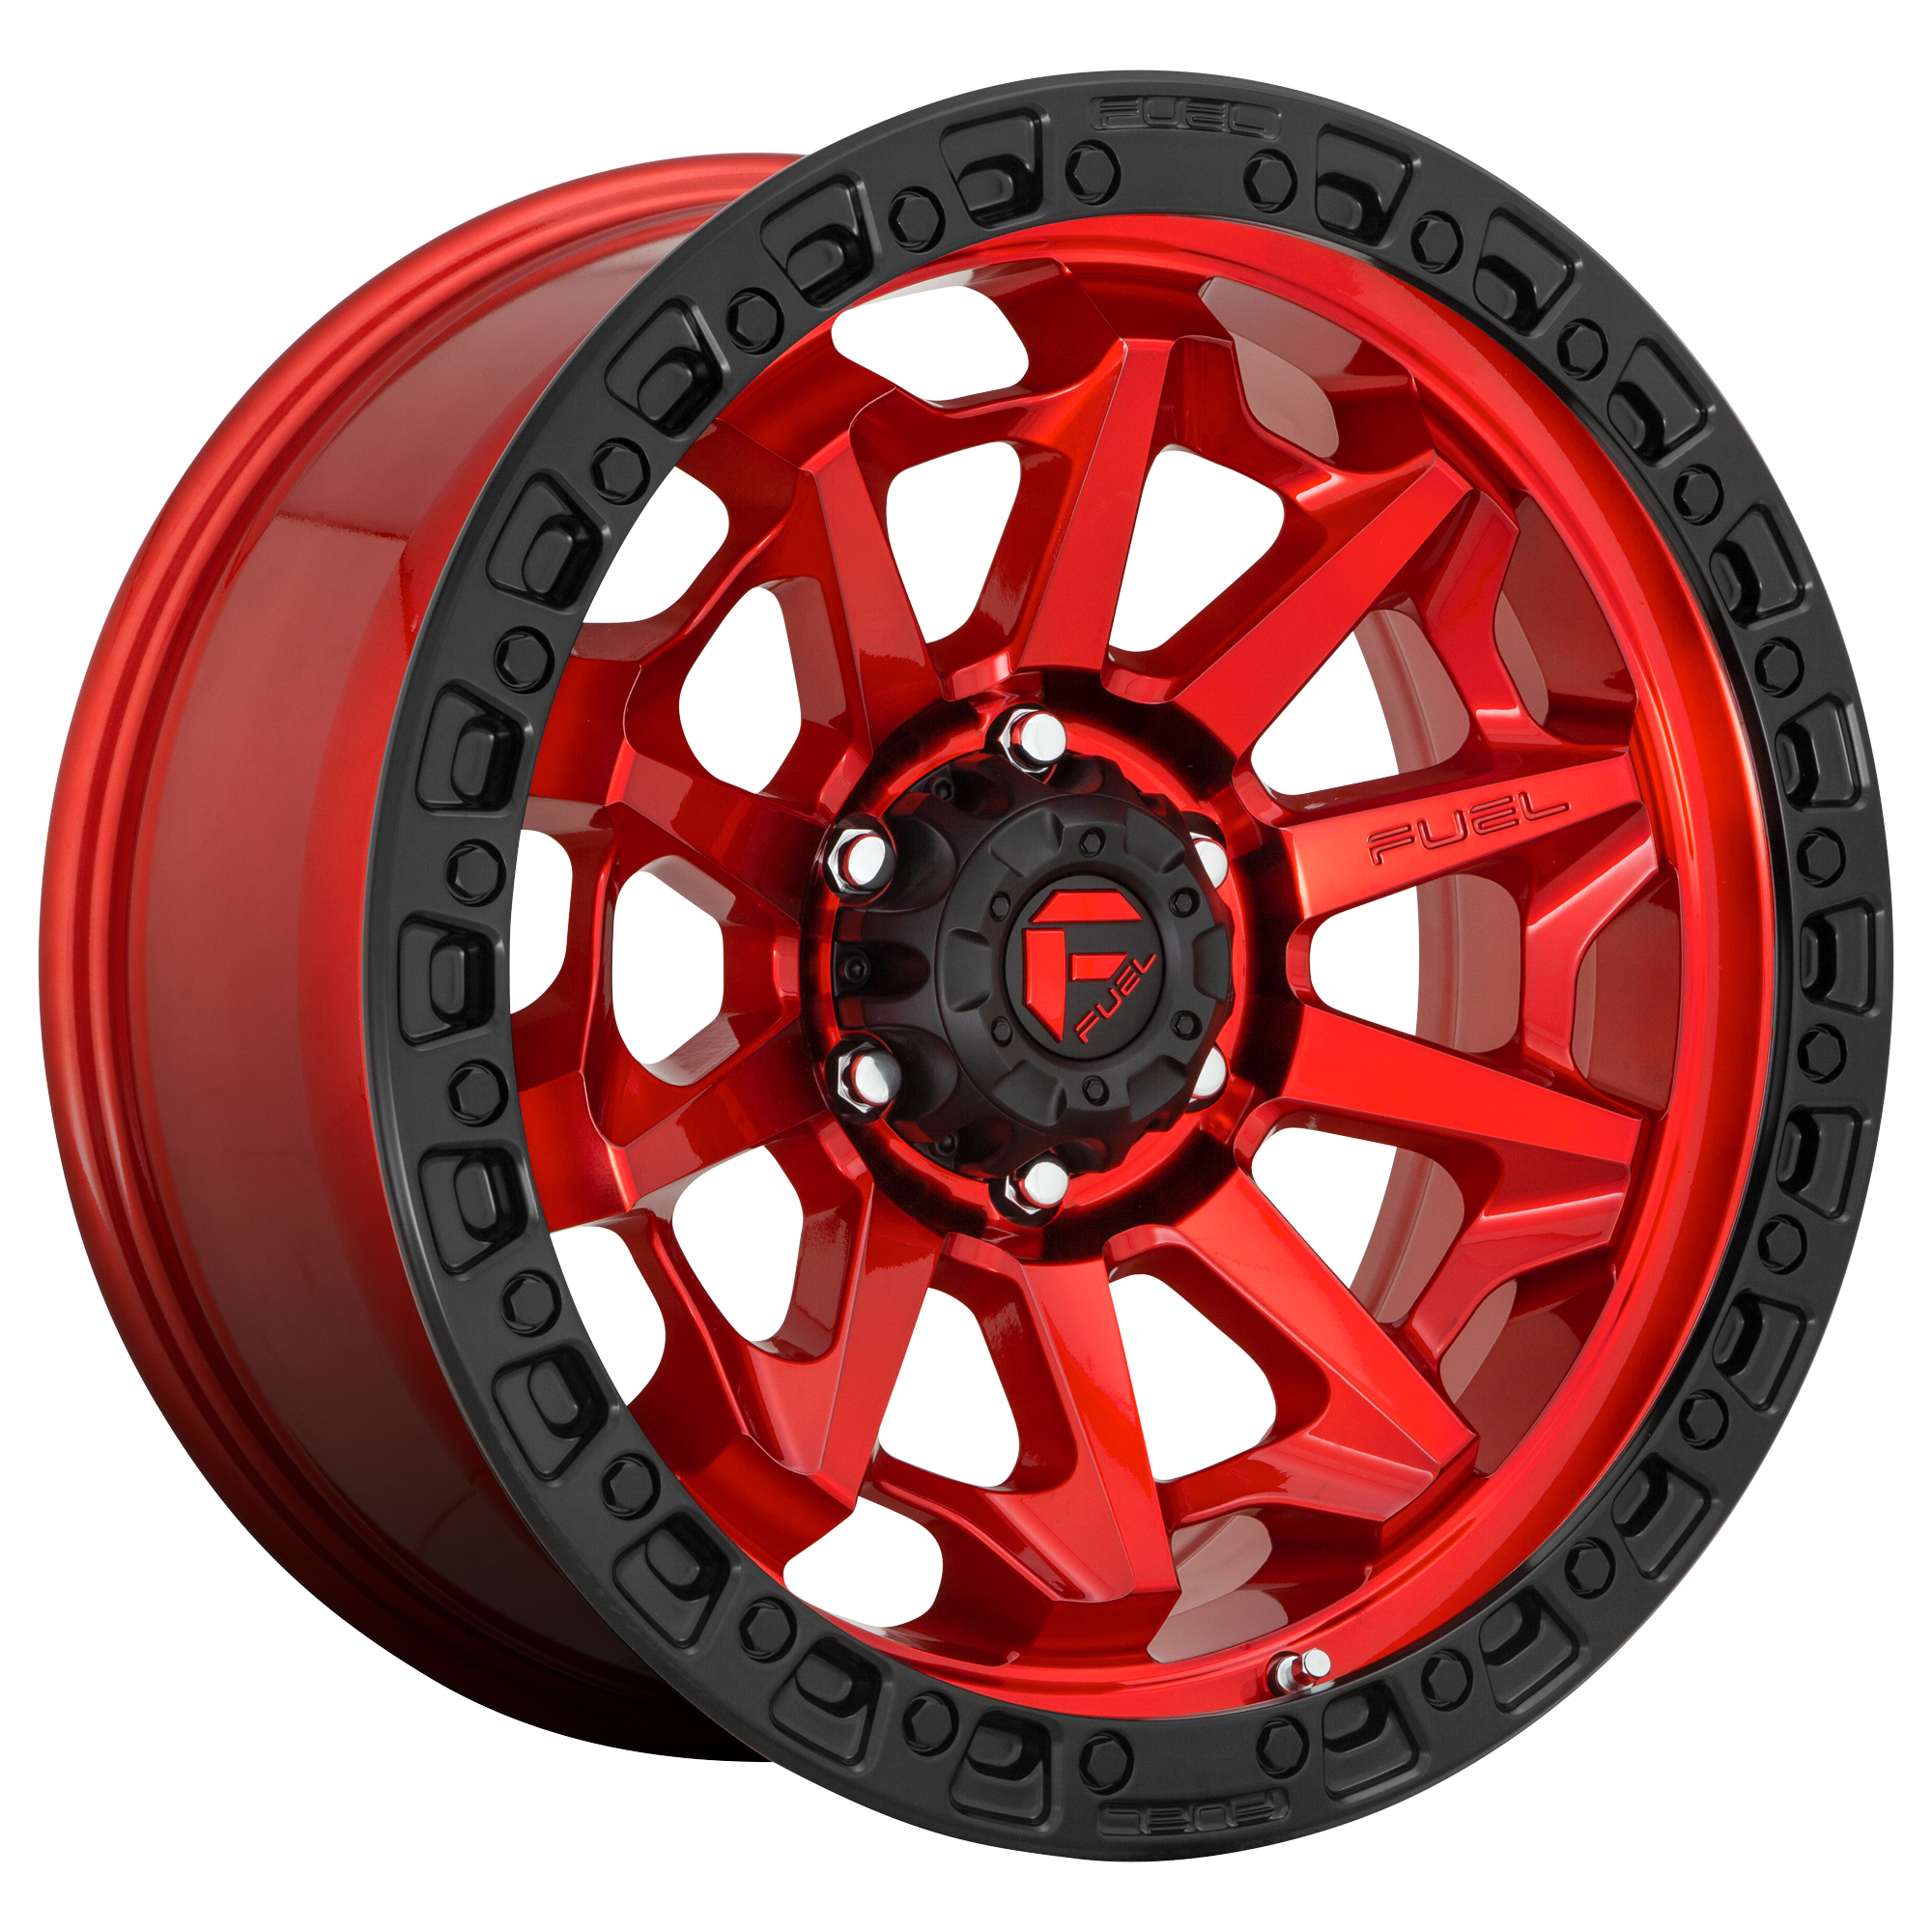 COVERT 17x9 6x139.70 CANDY RED BLACK BEAD RING (1 mm) - Tires and Engine Performance